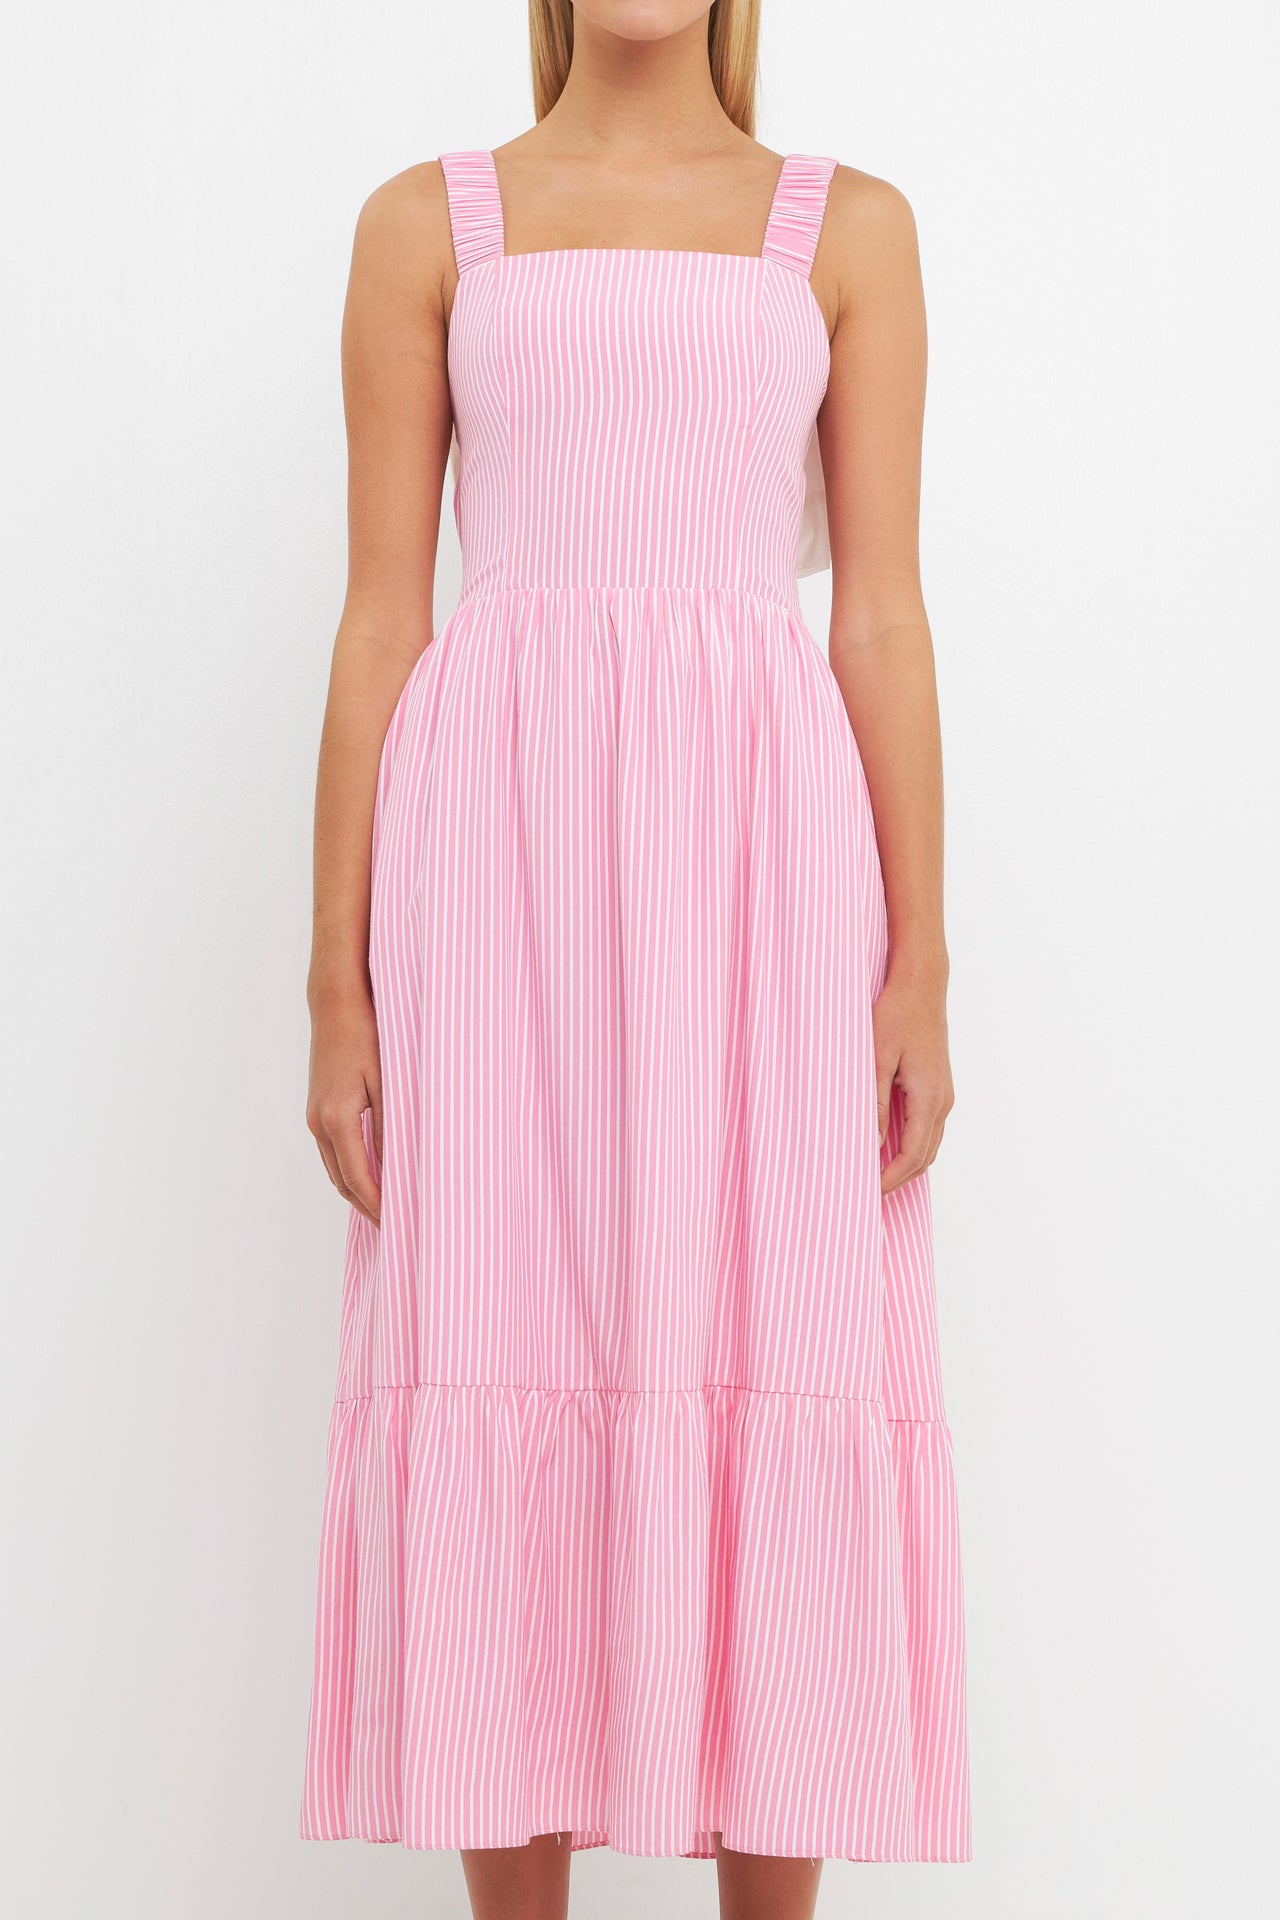 ENGLISH FACTORY - Contrast Bow Striped Maxi Dress - DRESSES available at Objectrare